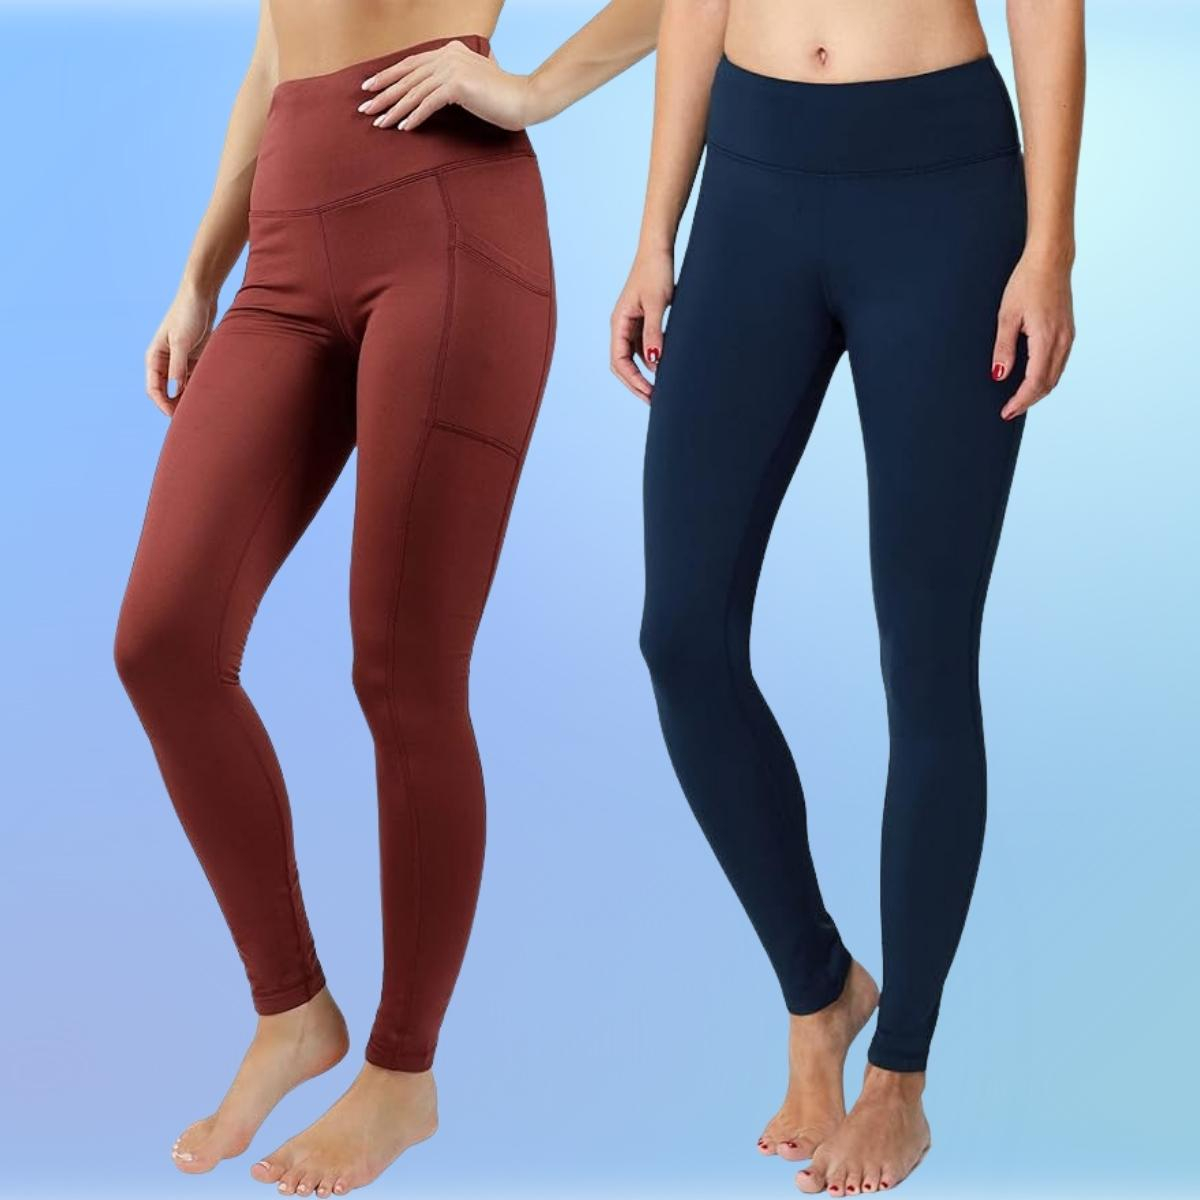 😍 A MUST! Look at these new extra warm leggings and matching jackets!